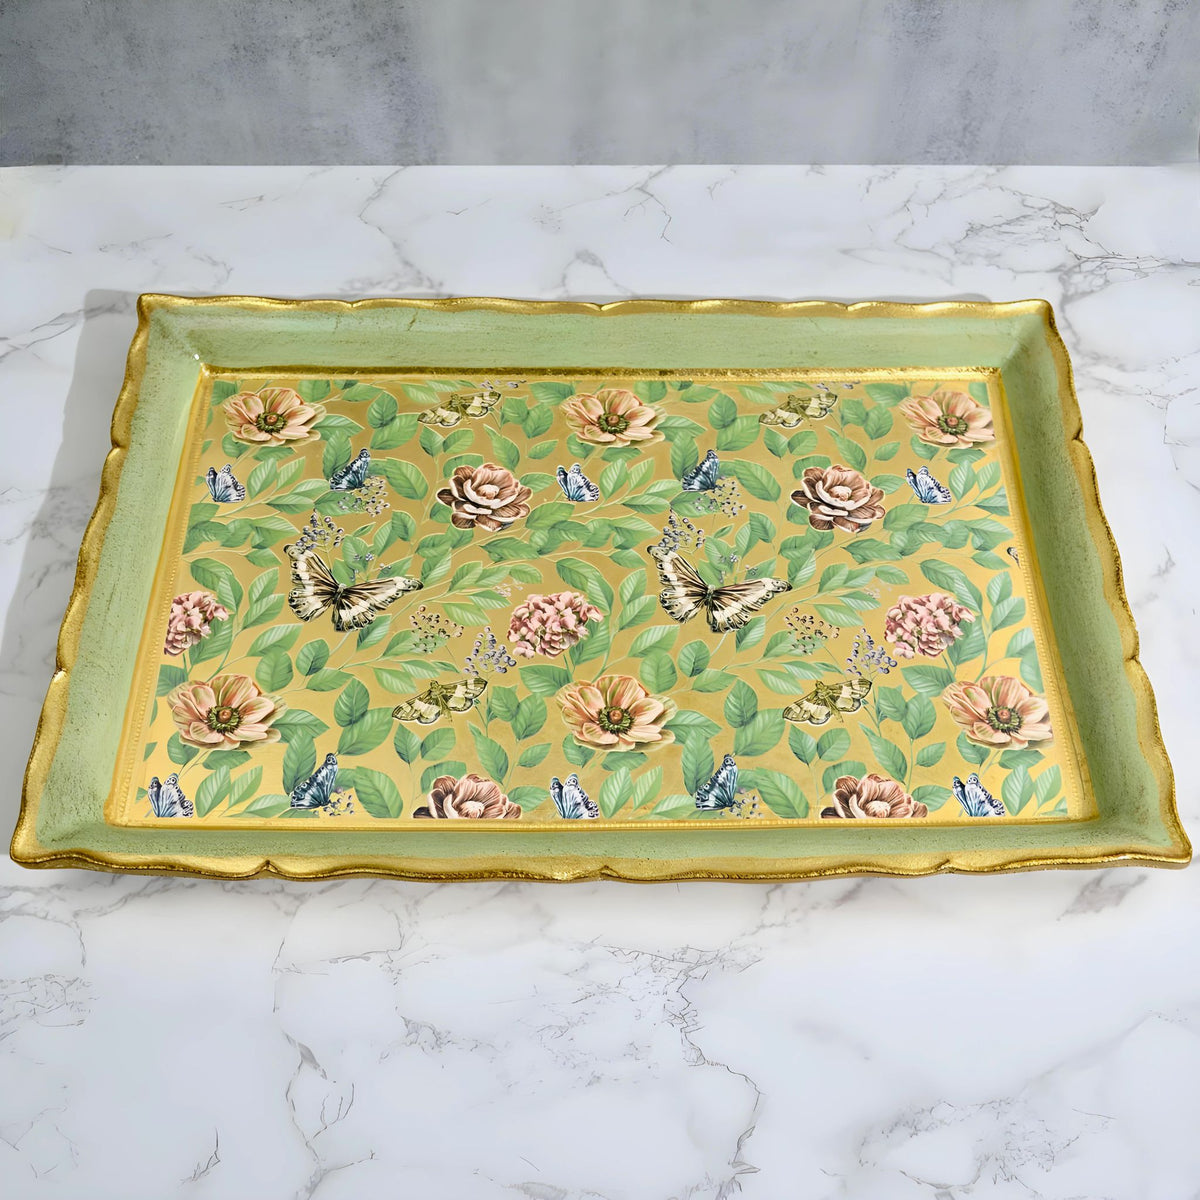 Florentine Carved Wood Decoupage Tray, Floral &amp; Butterflies - My Italian Decor